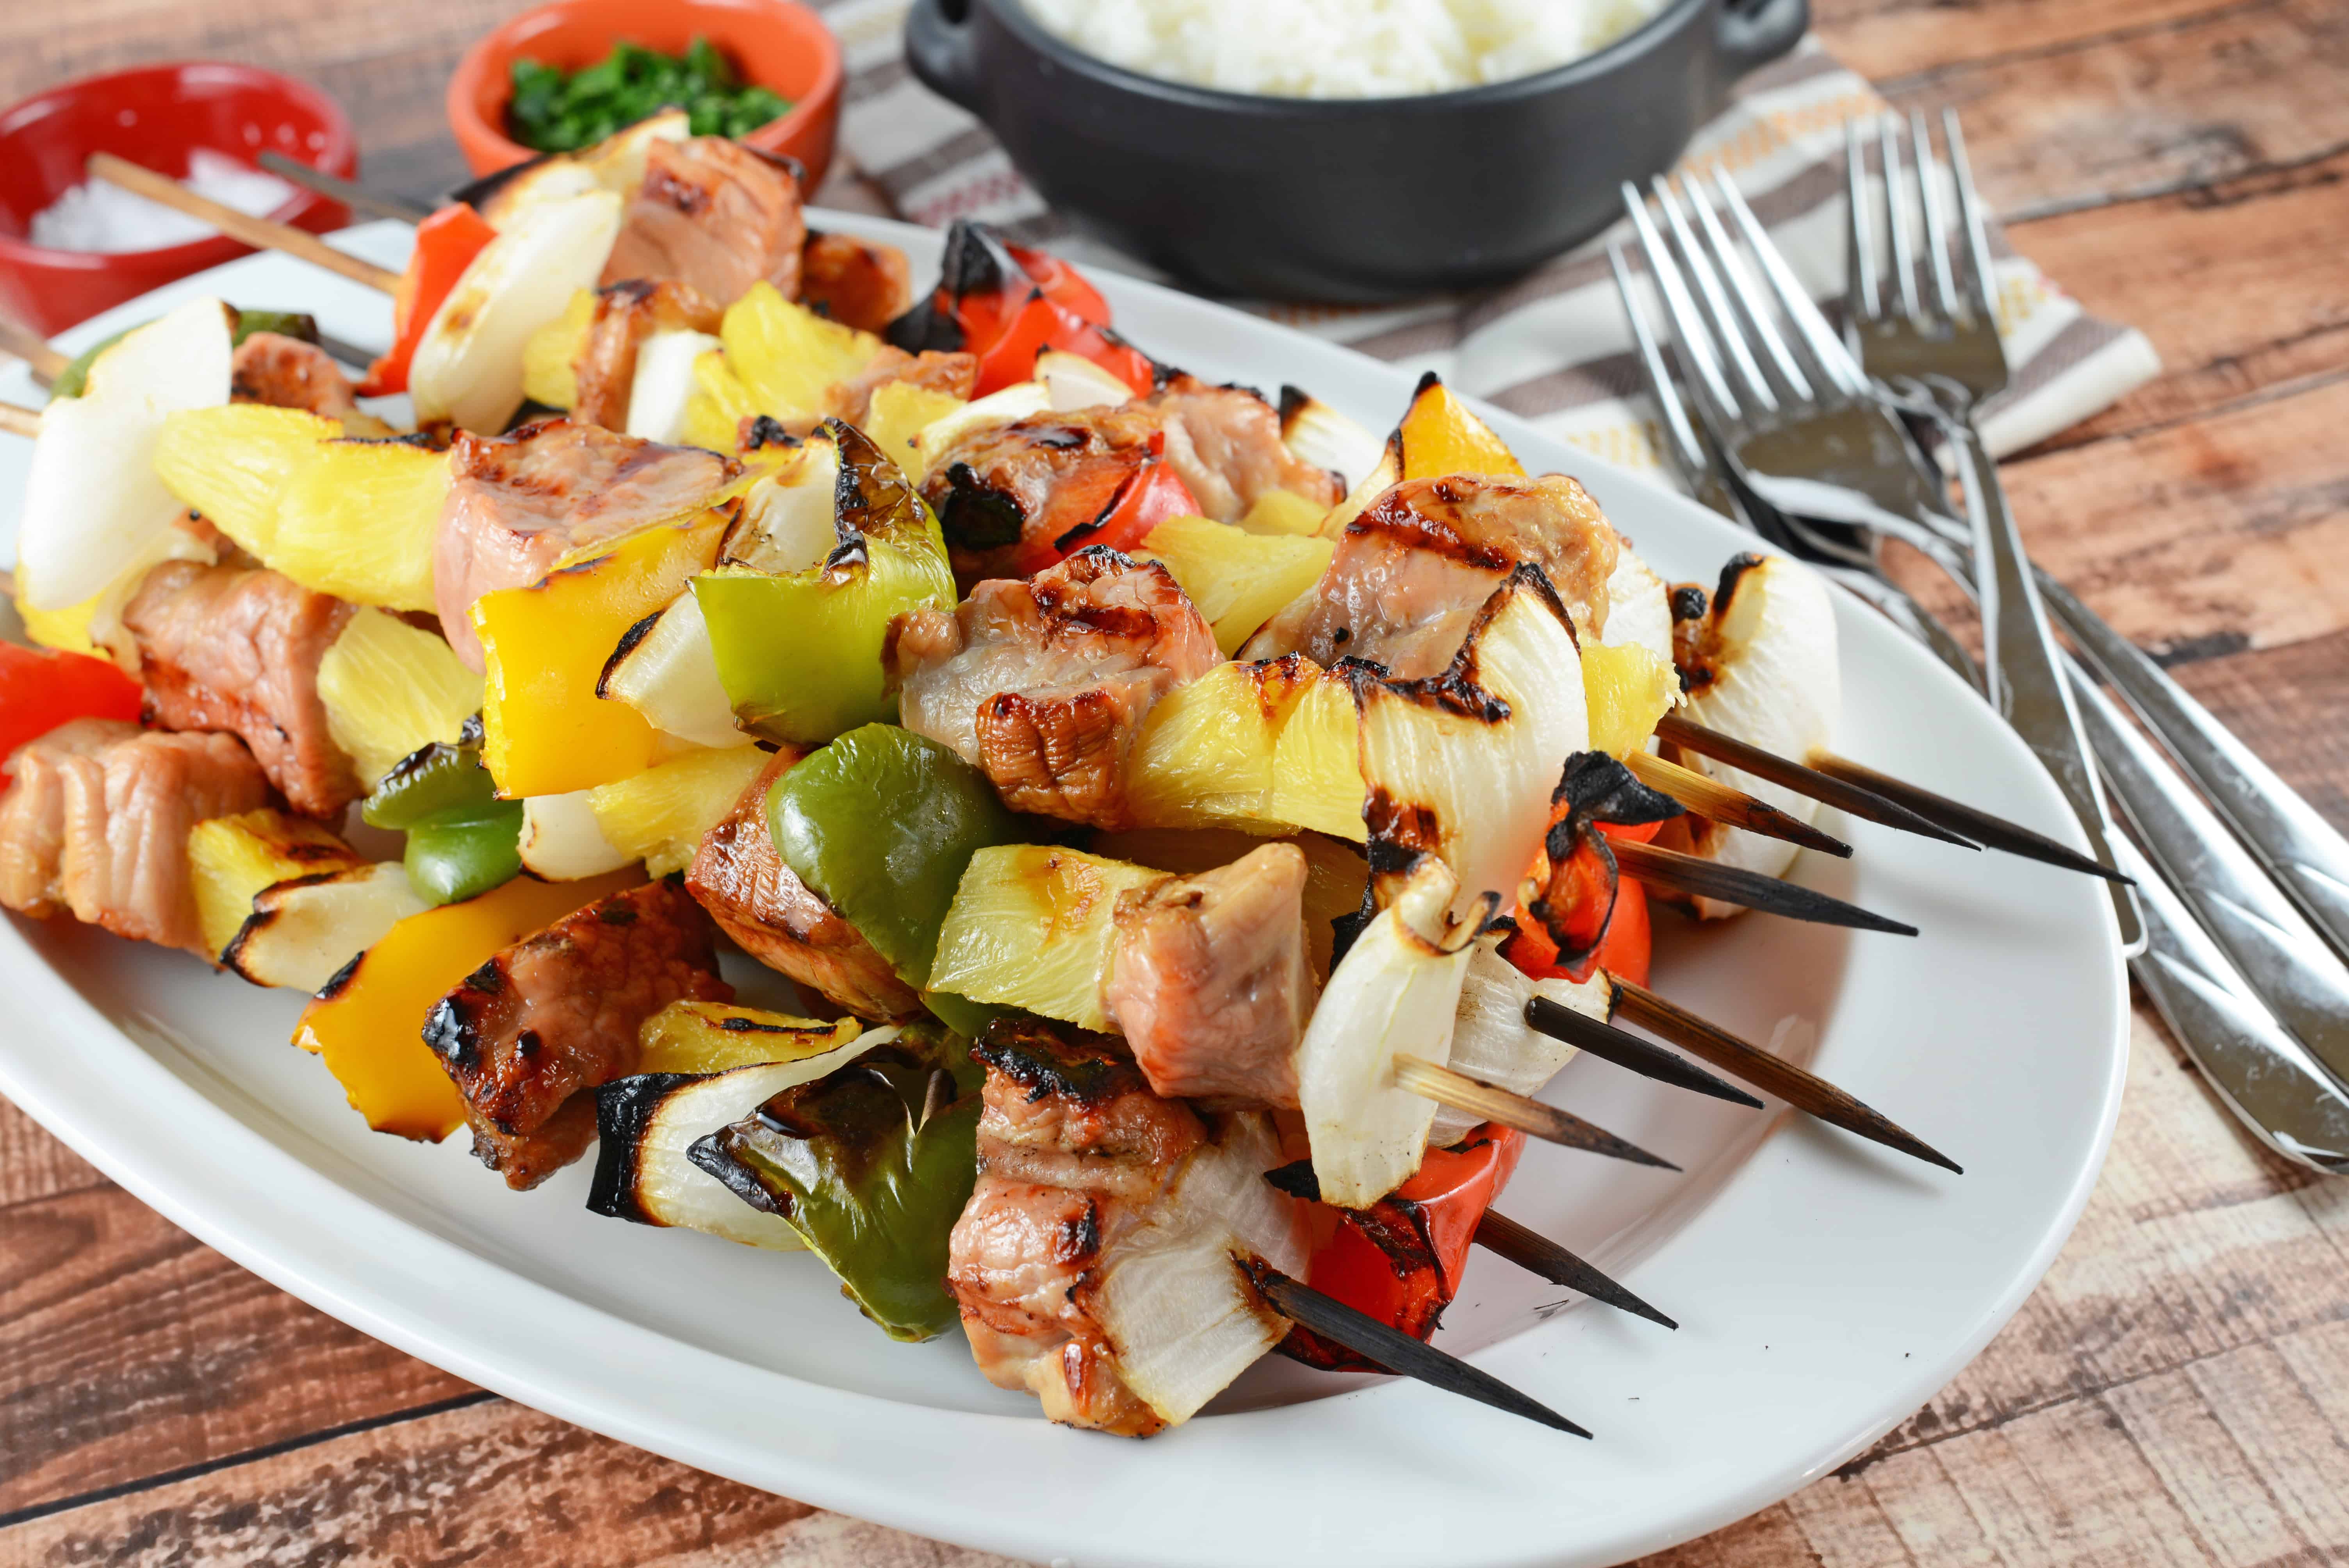 Teriyaki Pork Kabobs Recipe - Kabobs on the grill are a class summer meal. Marinated pork tenderloin paired with pineapple, bell pepper and sweet onion, makes this kabob recipe an quick dinner recipe. www.savoryexperiments.com